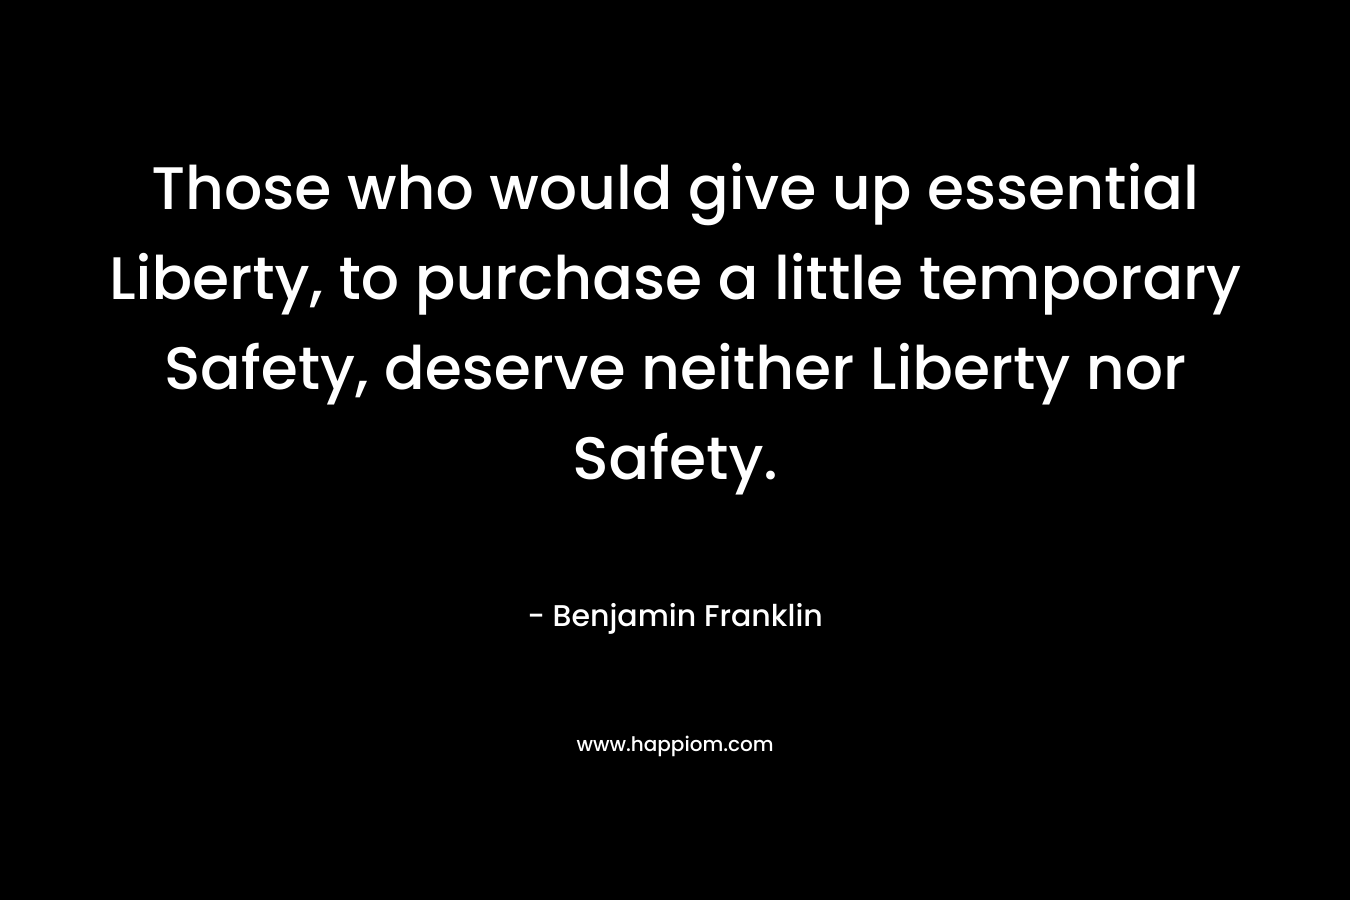 Those who would give up essential Liberty, to purchase a little temporary Safety, deserve neither Liberty nor Safety. – Benjamin Franklin